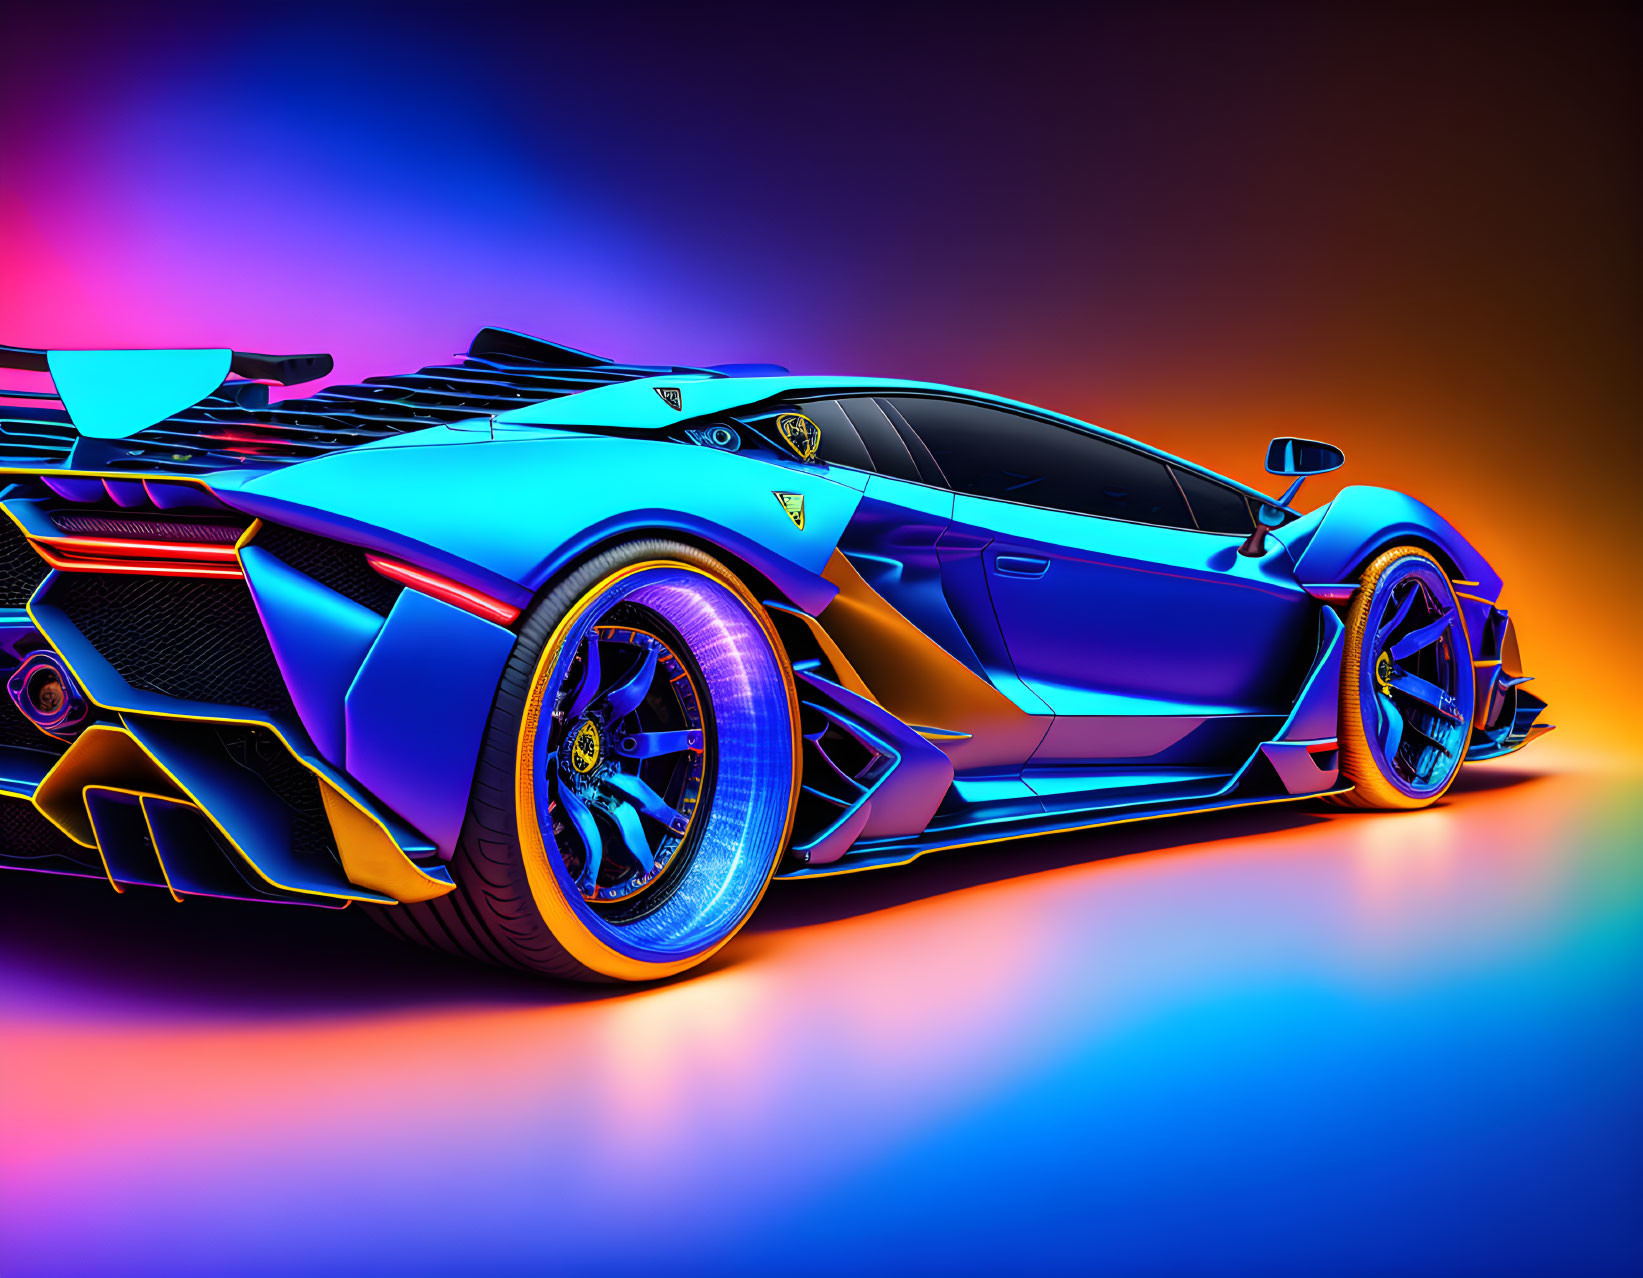 Modern sports car in vibrant neon colors on gradient backdrop